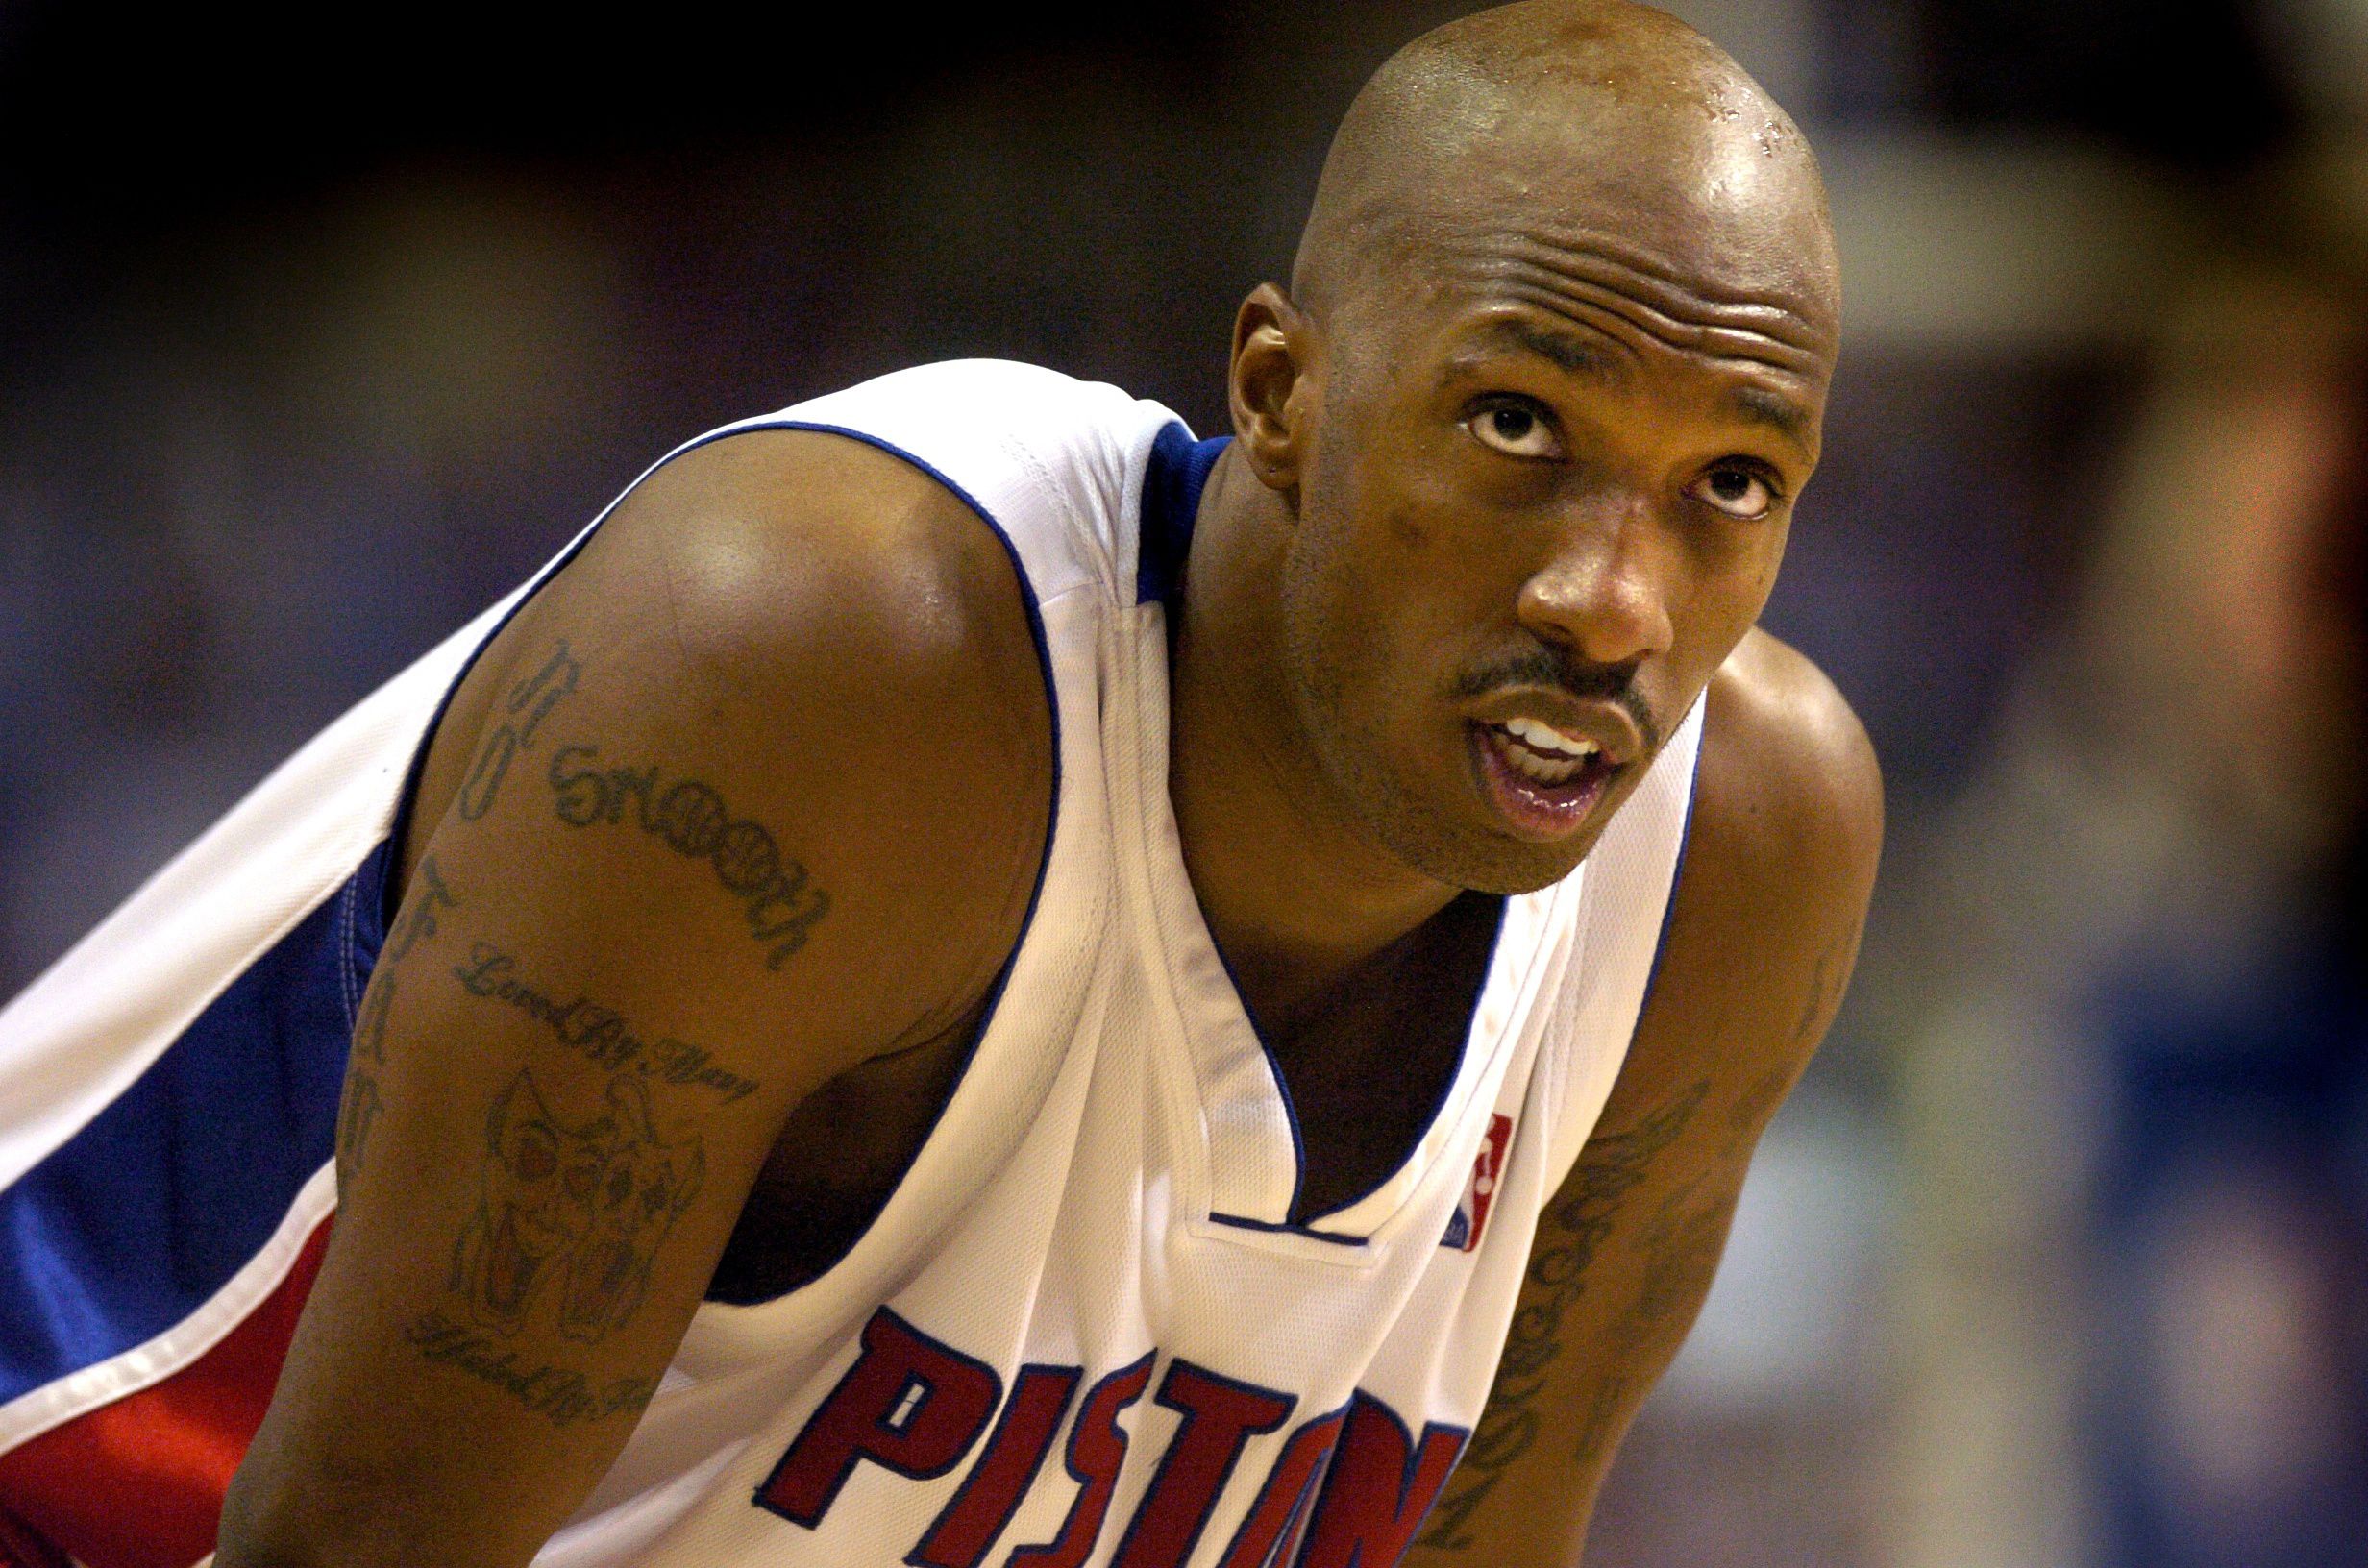 Chauncey Billups: A look back at his Pistons career